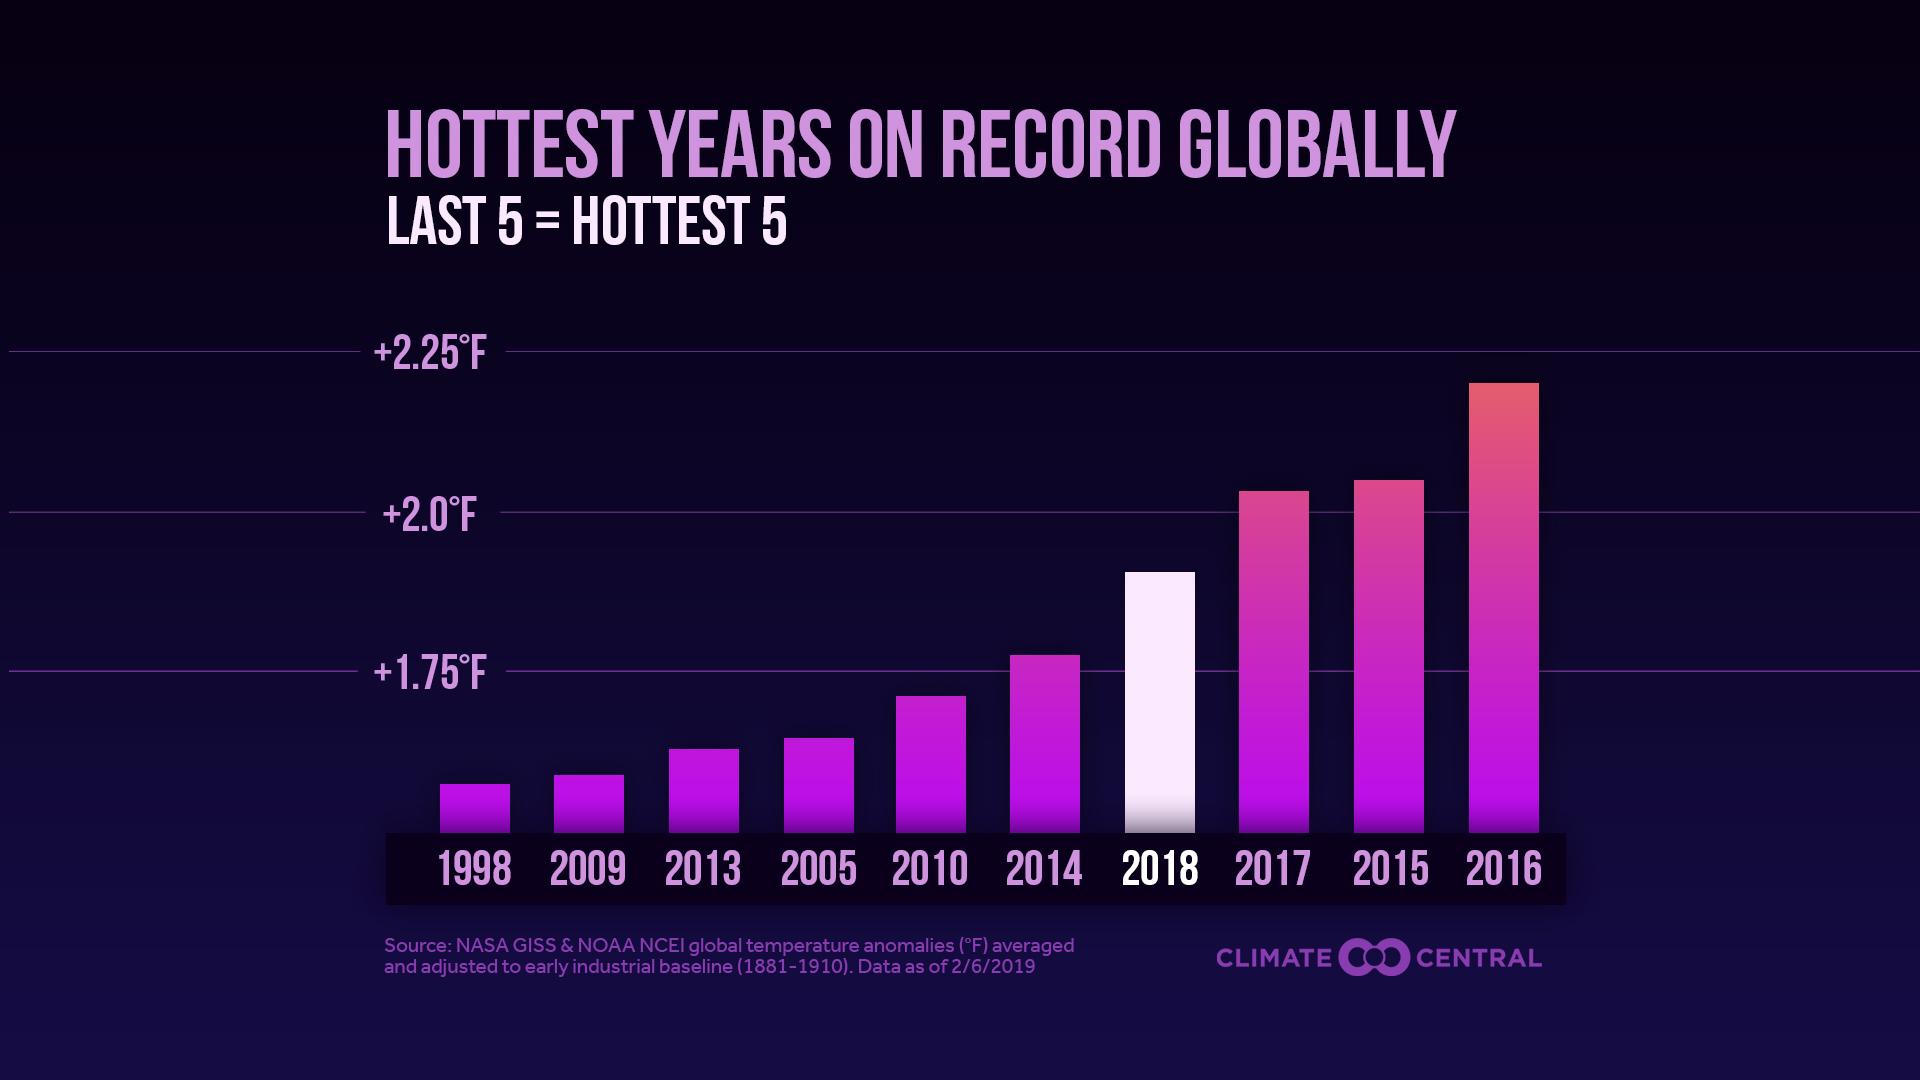 Set 1 - 2018 Year in Review: Temperatures & Billion-Dollar Disasters